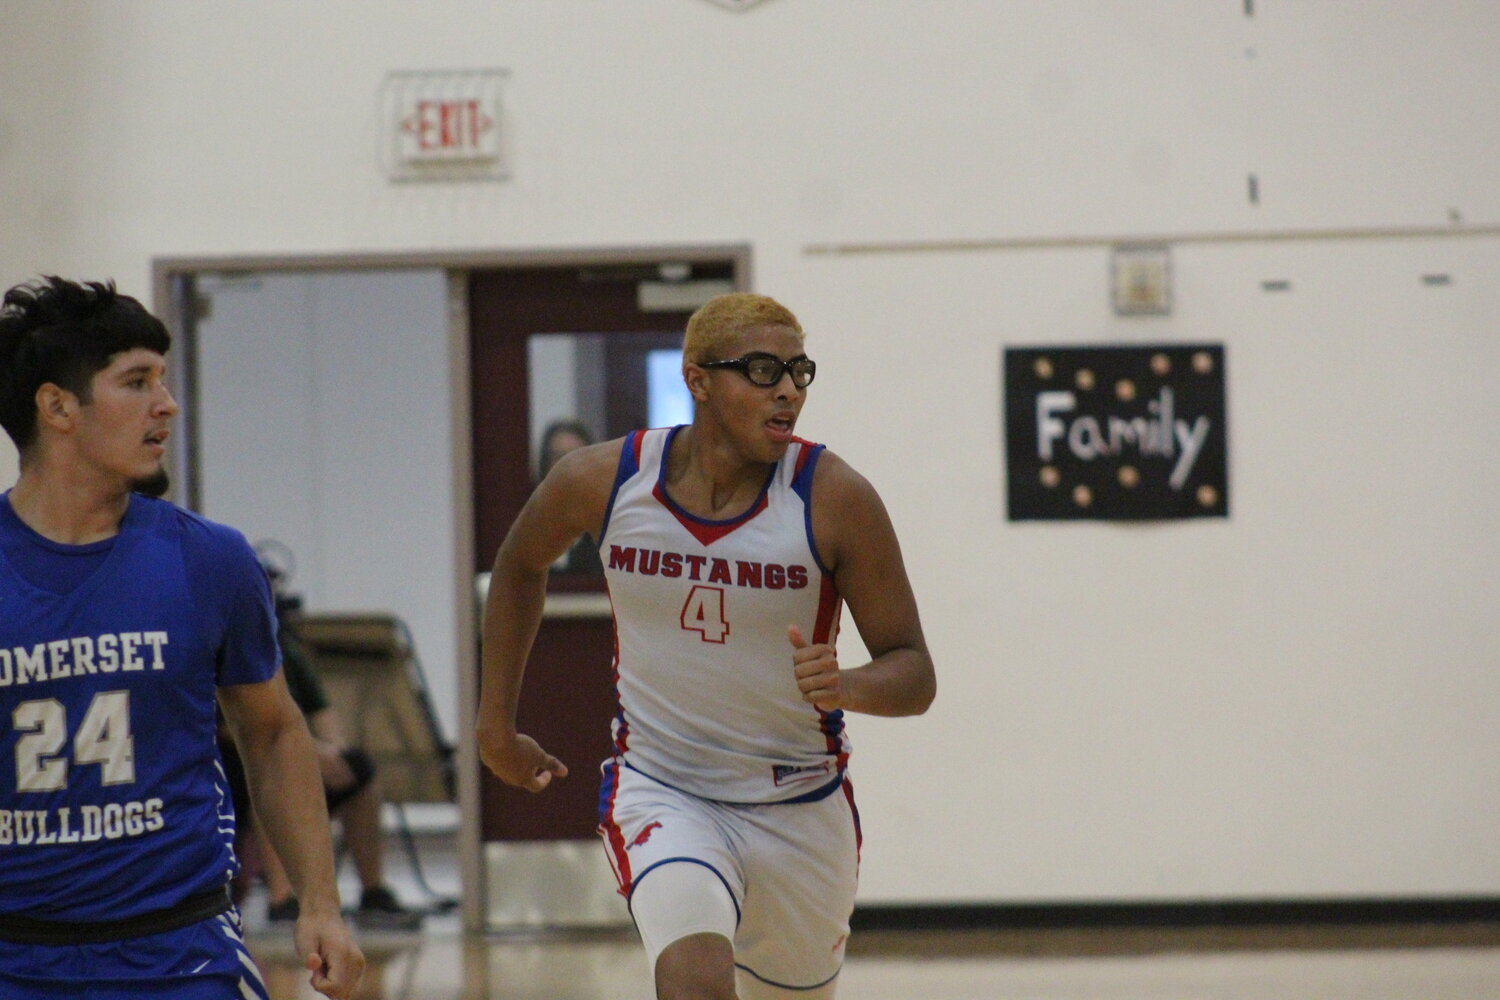 Mustangs senior Carl White runs down the court for the East team in the STCA All-Star Boys Basketball game in Floresville Saturday, May 18.